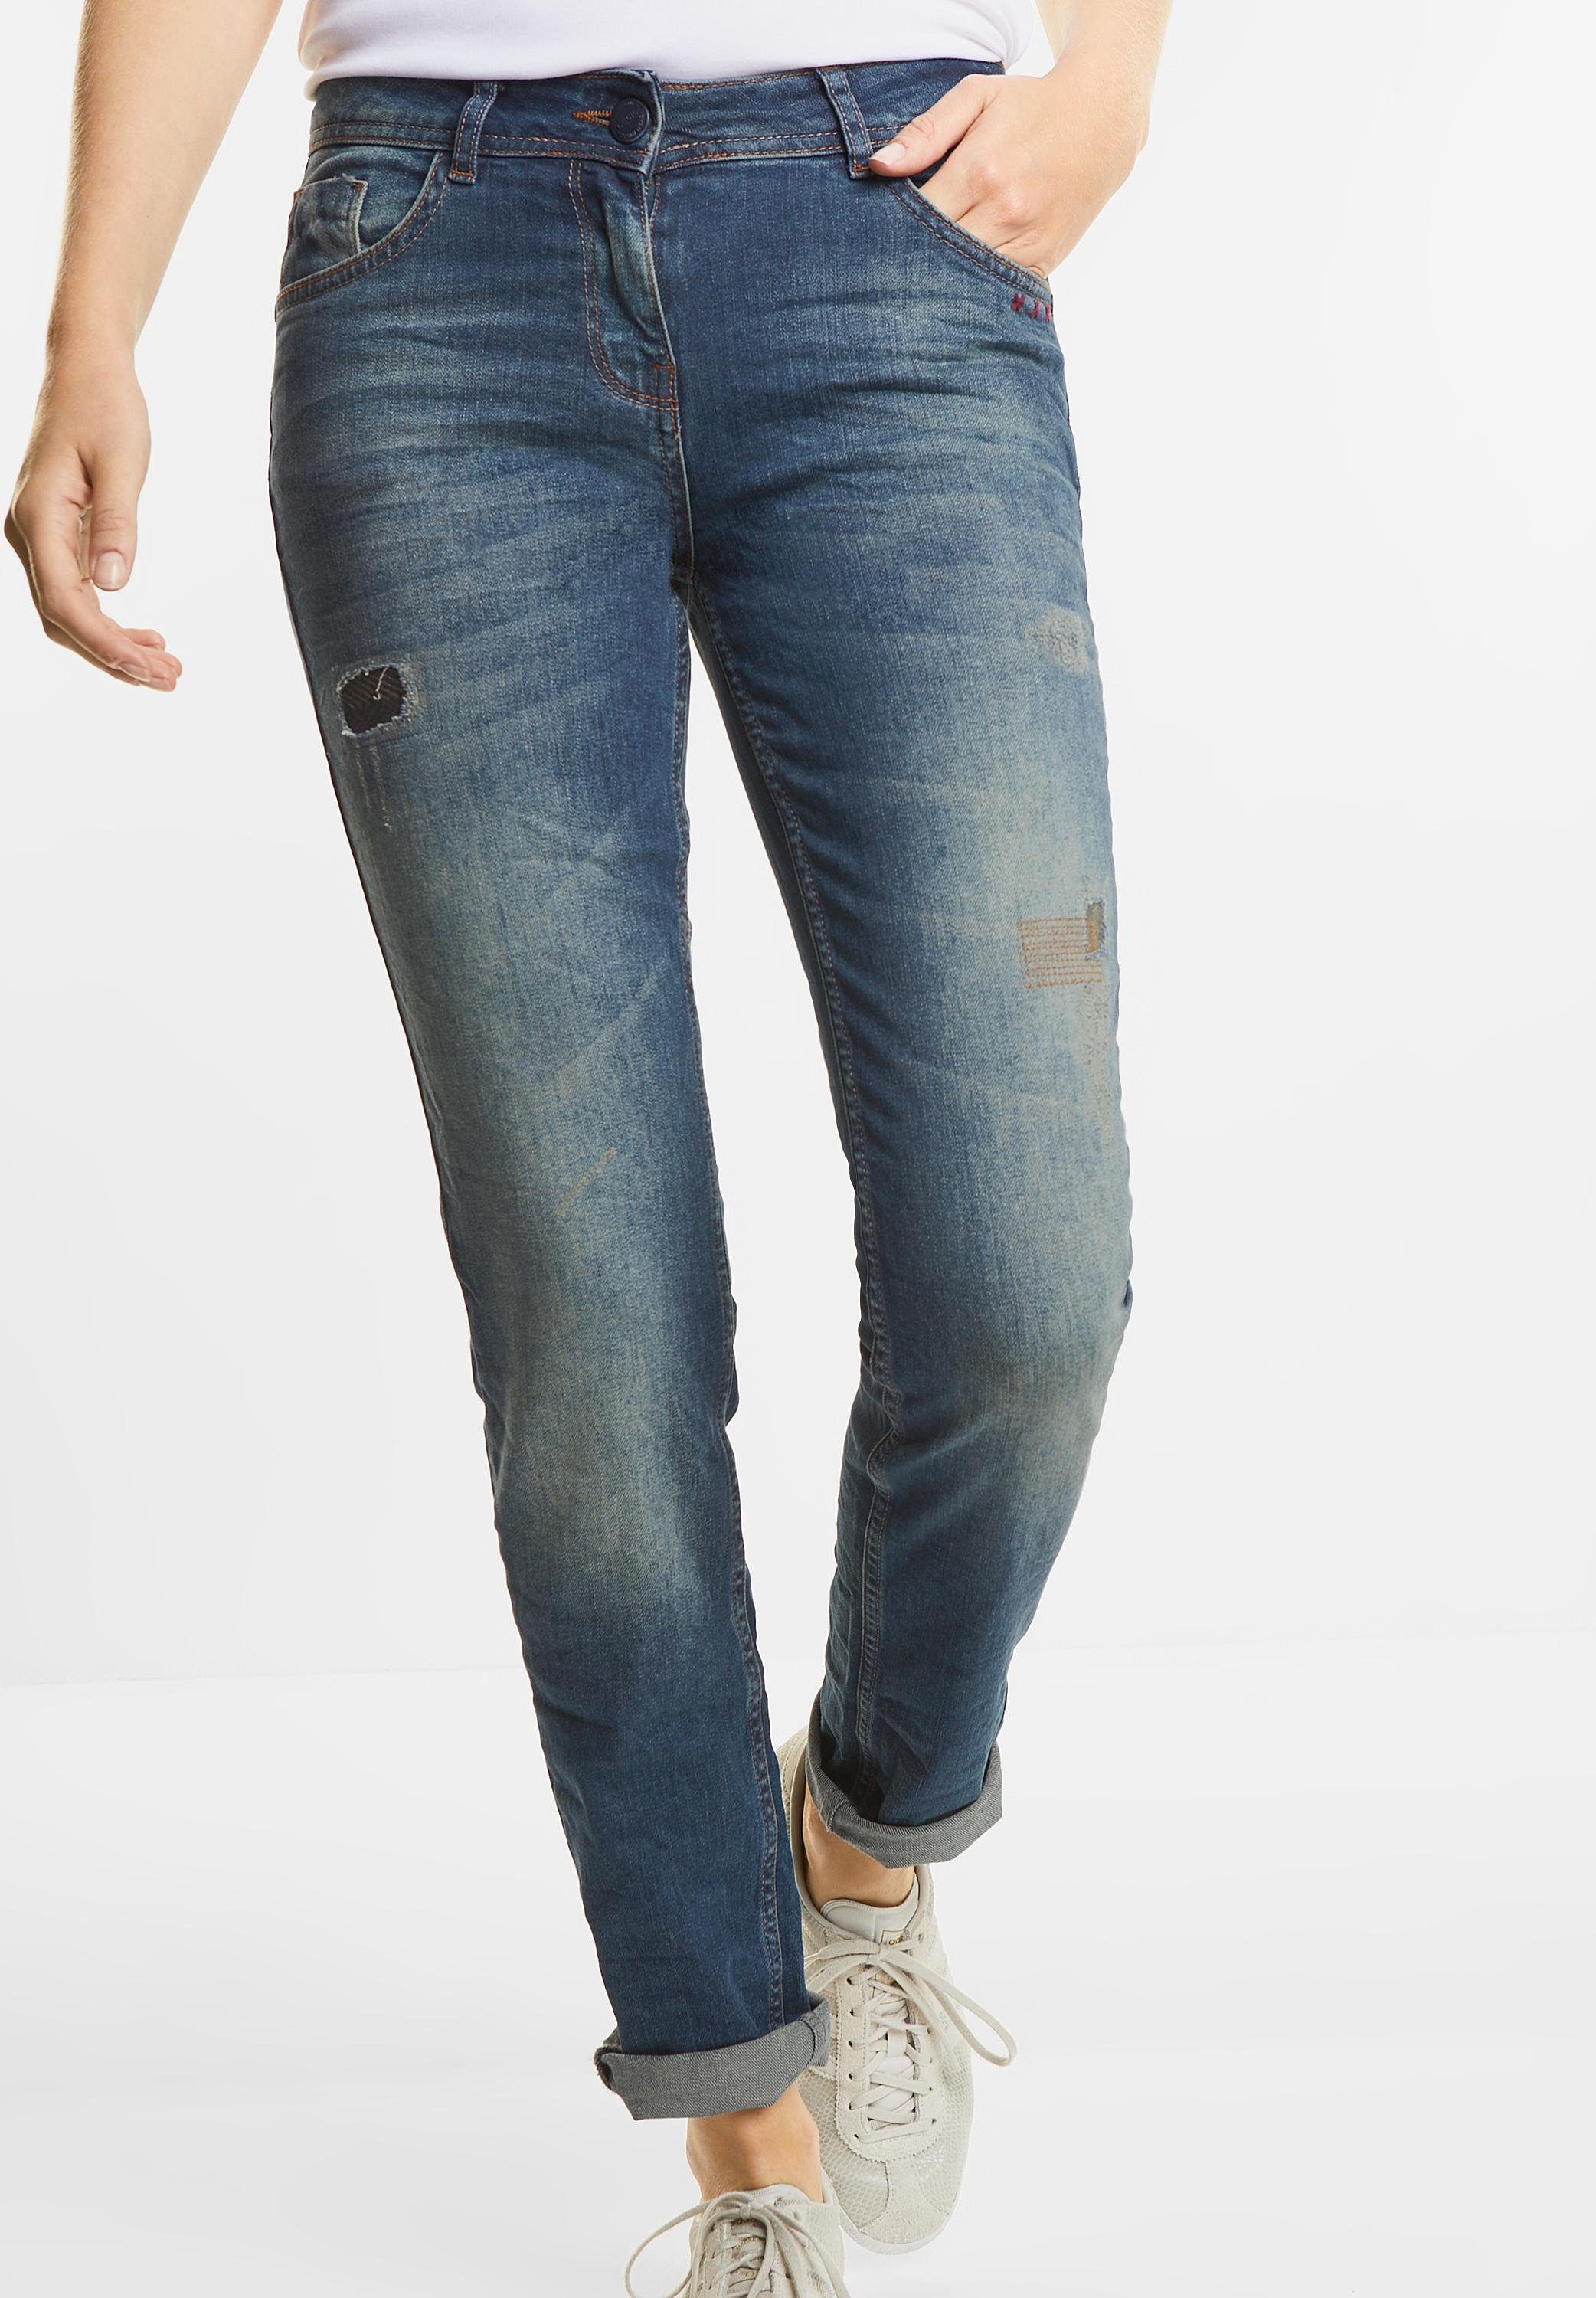 Otto - Cecil NU 15% KORTING: CECIL Patches-jeans Charlize